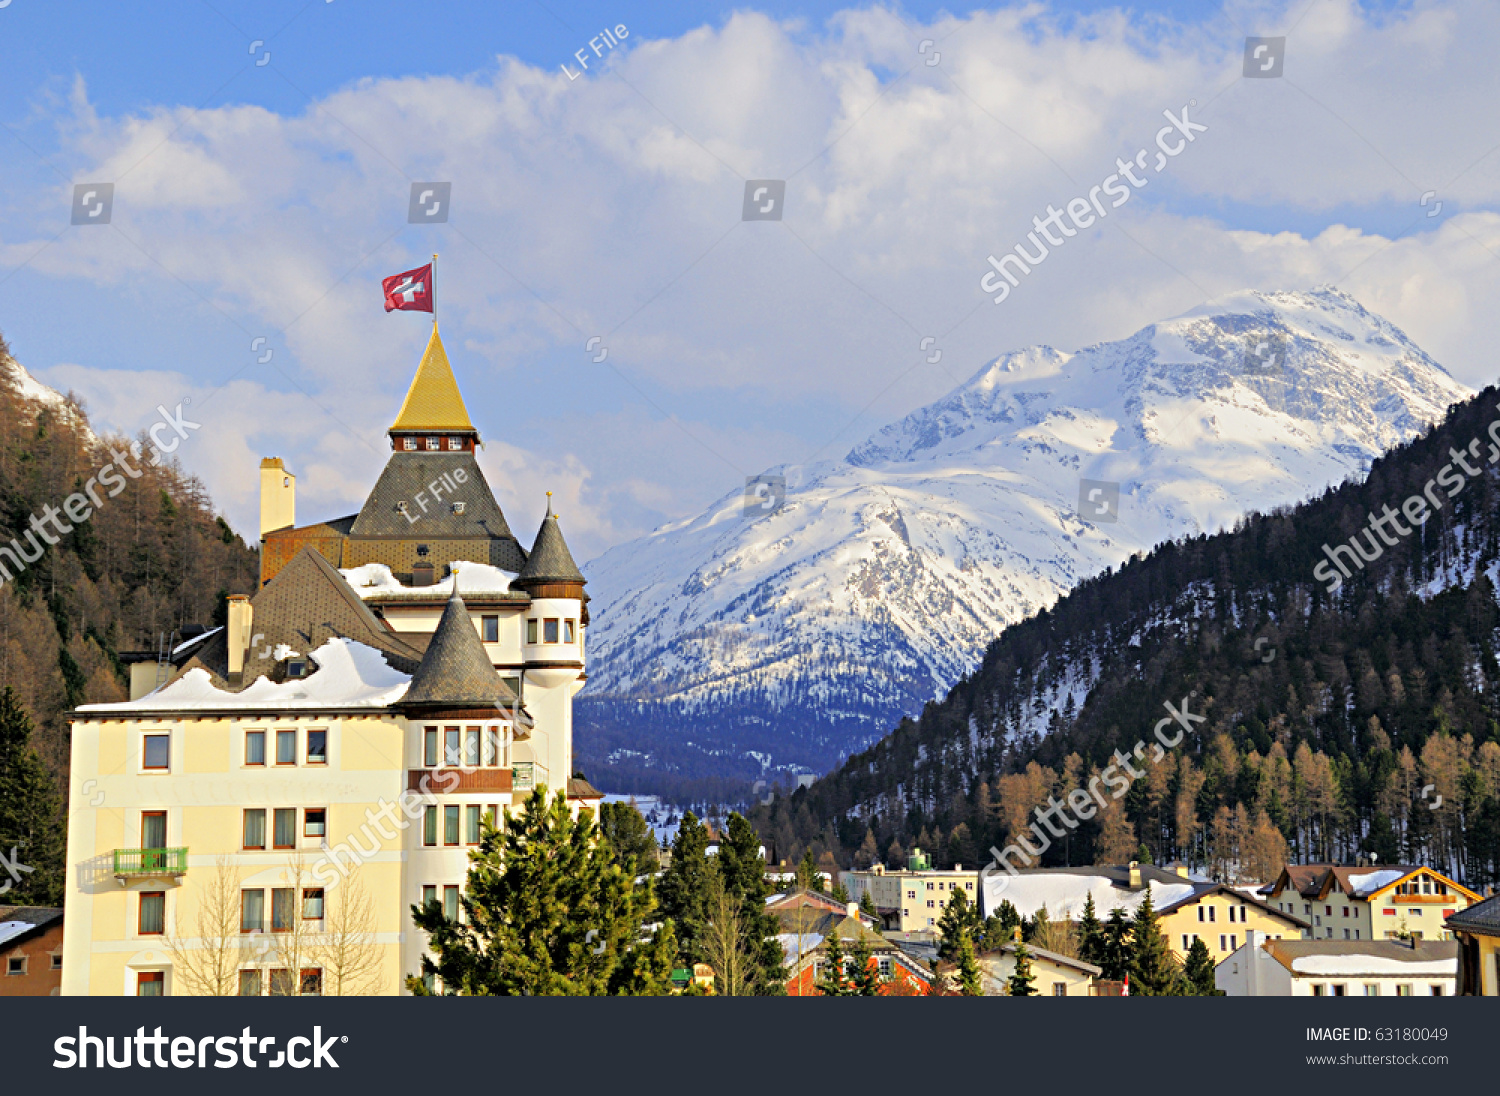 View of the Swiss mountain village of Pontresina in the Swiss Alps. #63180049